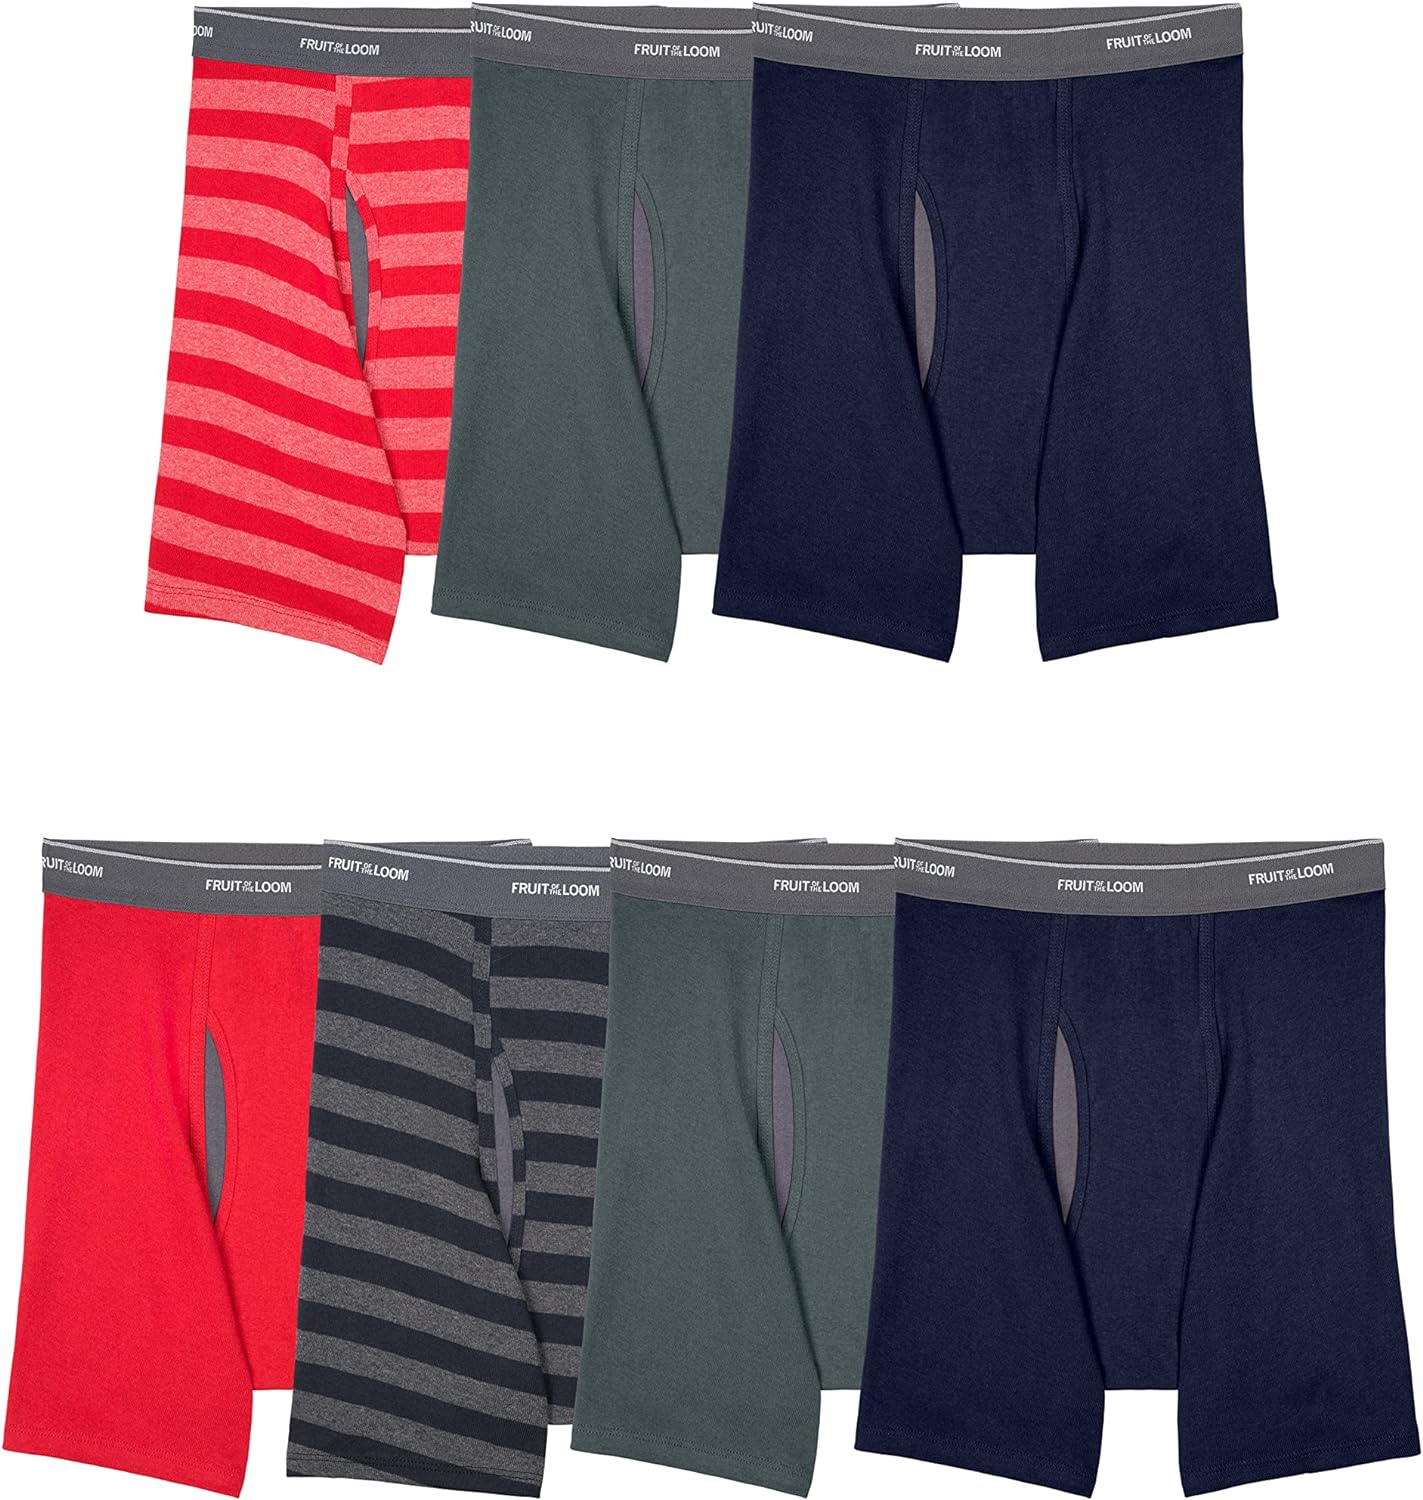 Fruit of the Loom Men’s Coolzone Boxer Briefs, Moisture Wicking & Breathable, Assorted Color Multipacks